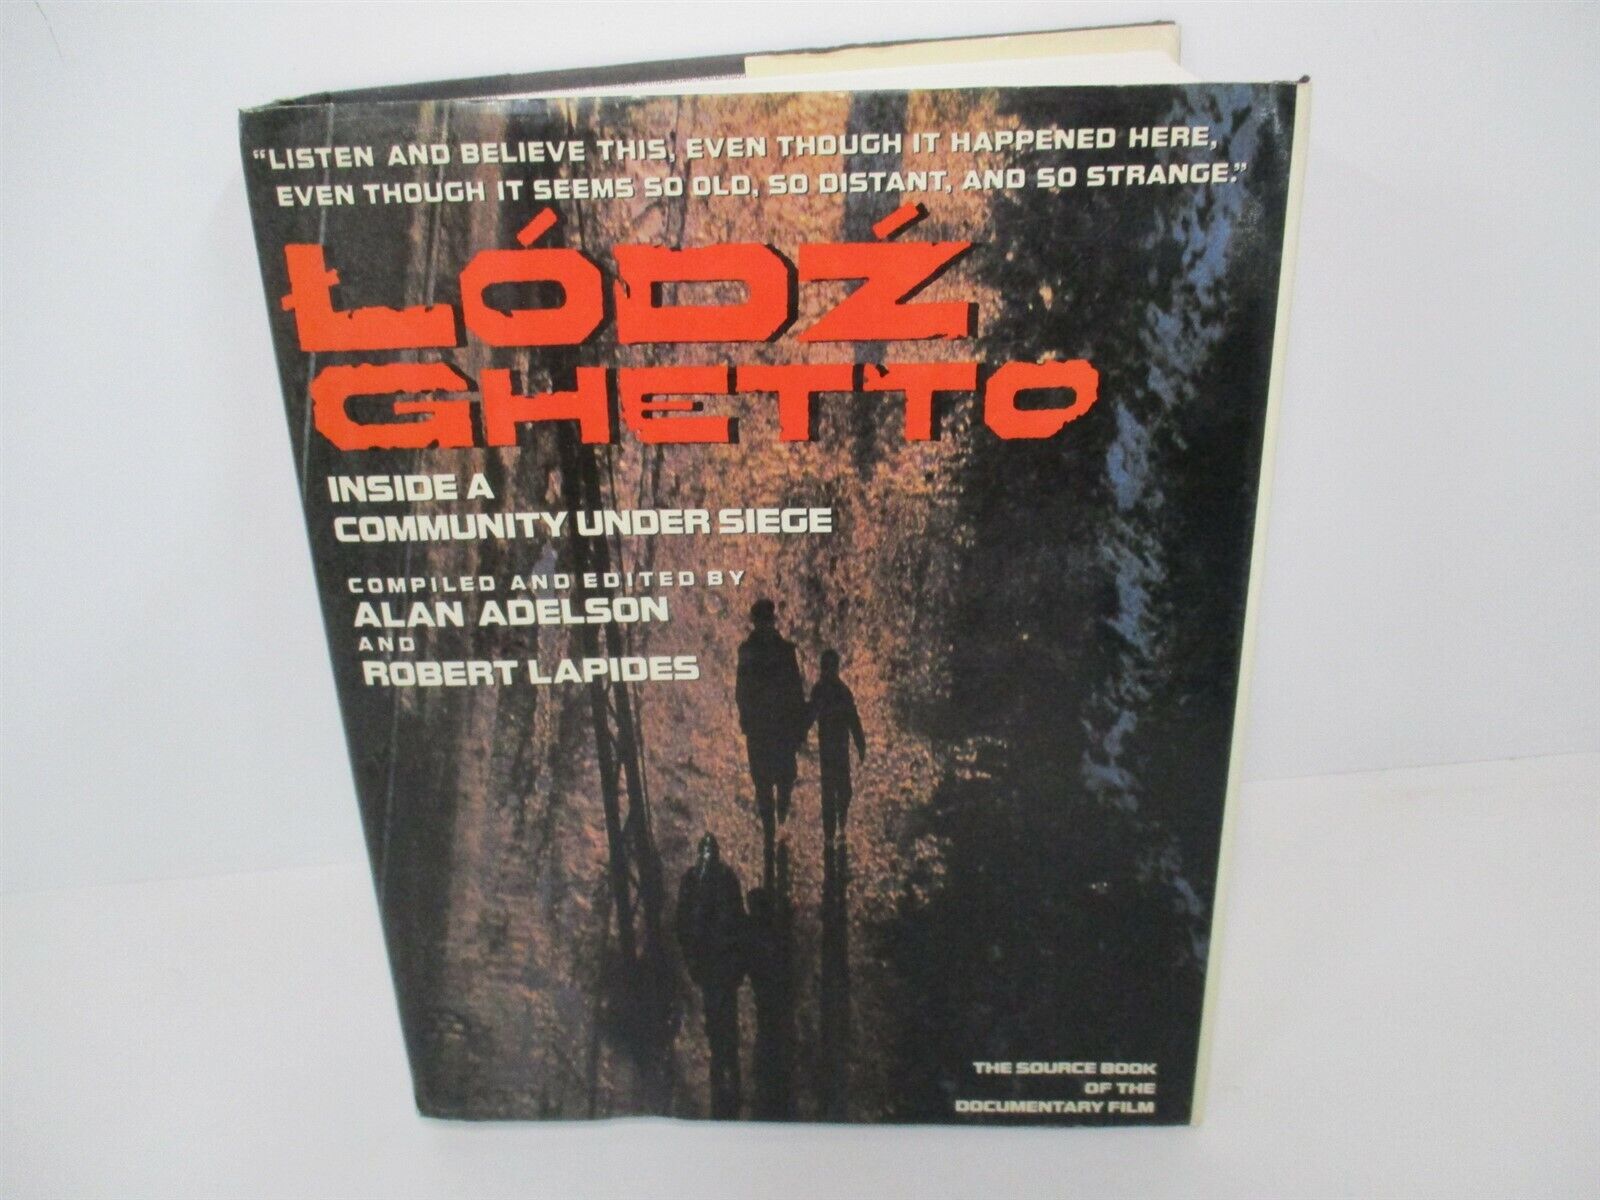 Lodz Ghetto Inside a Community Under Siege Paperback 1991 By Alan Adelson